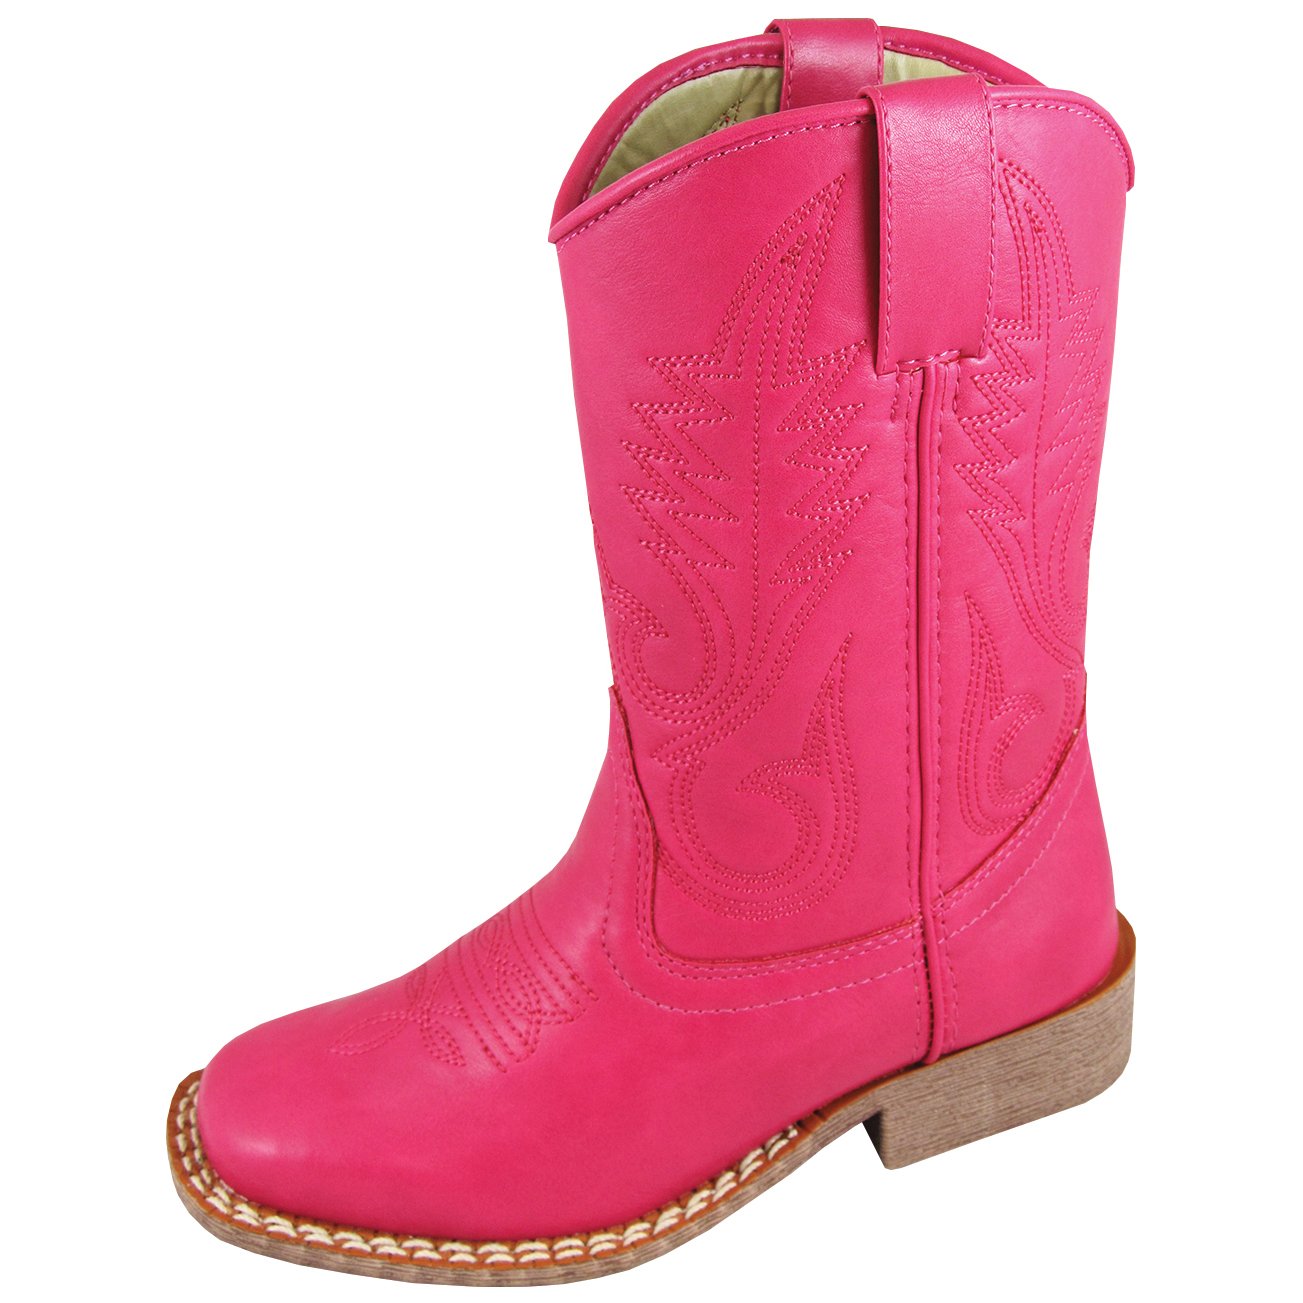 Smoky Mountain Girl's Youth Raspberry Square Toe Boot